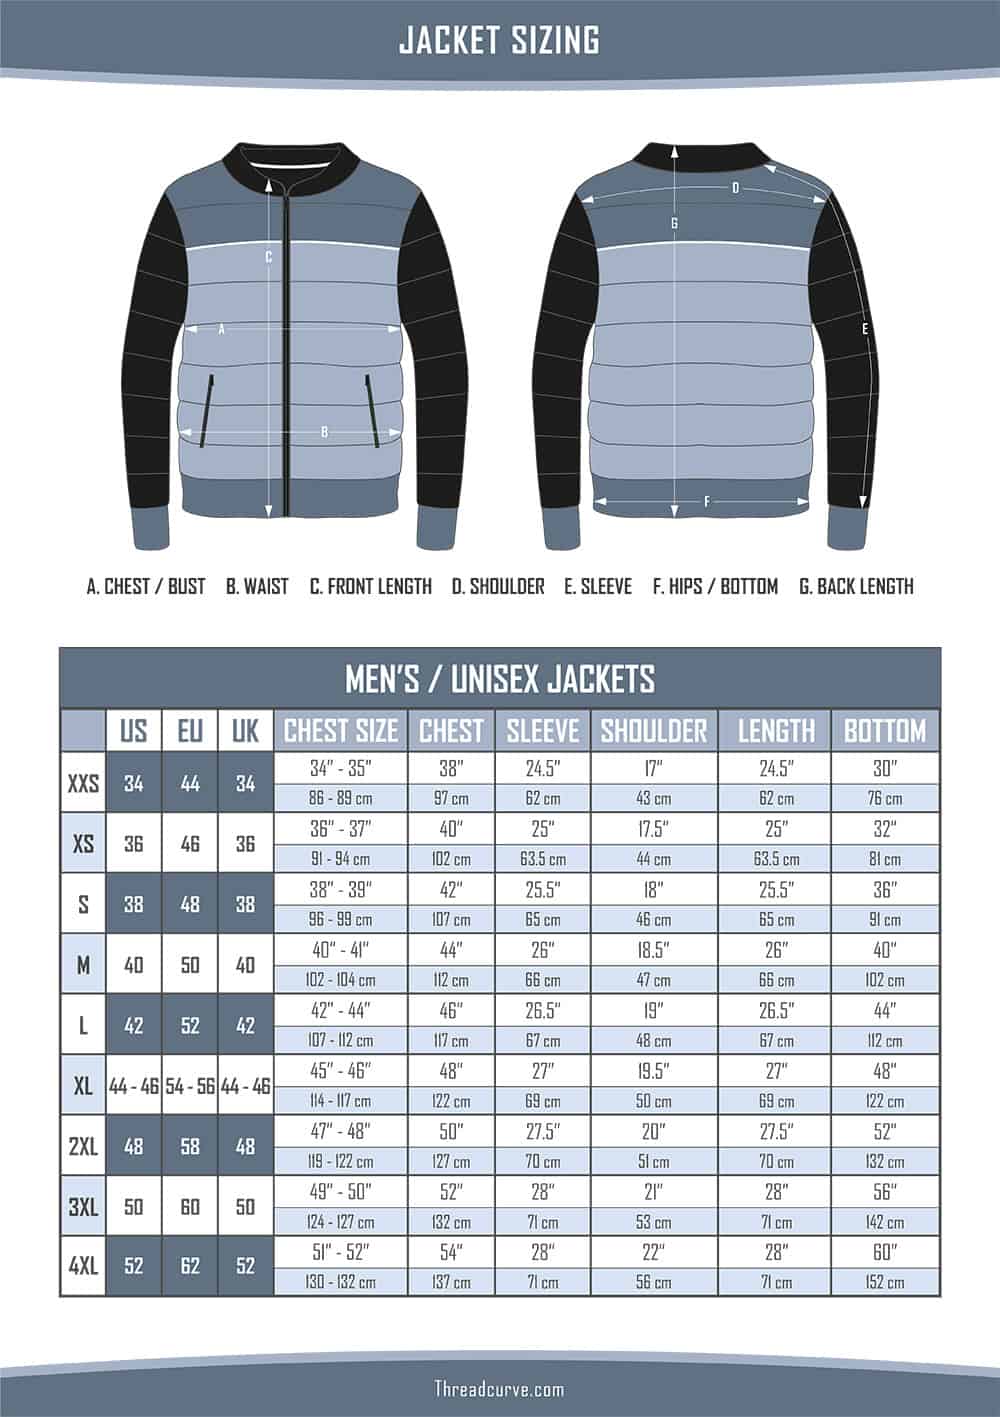 This is the chart for Men's and Unisex Jackets Sizes.